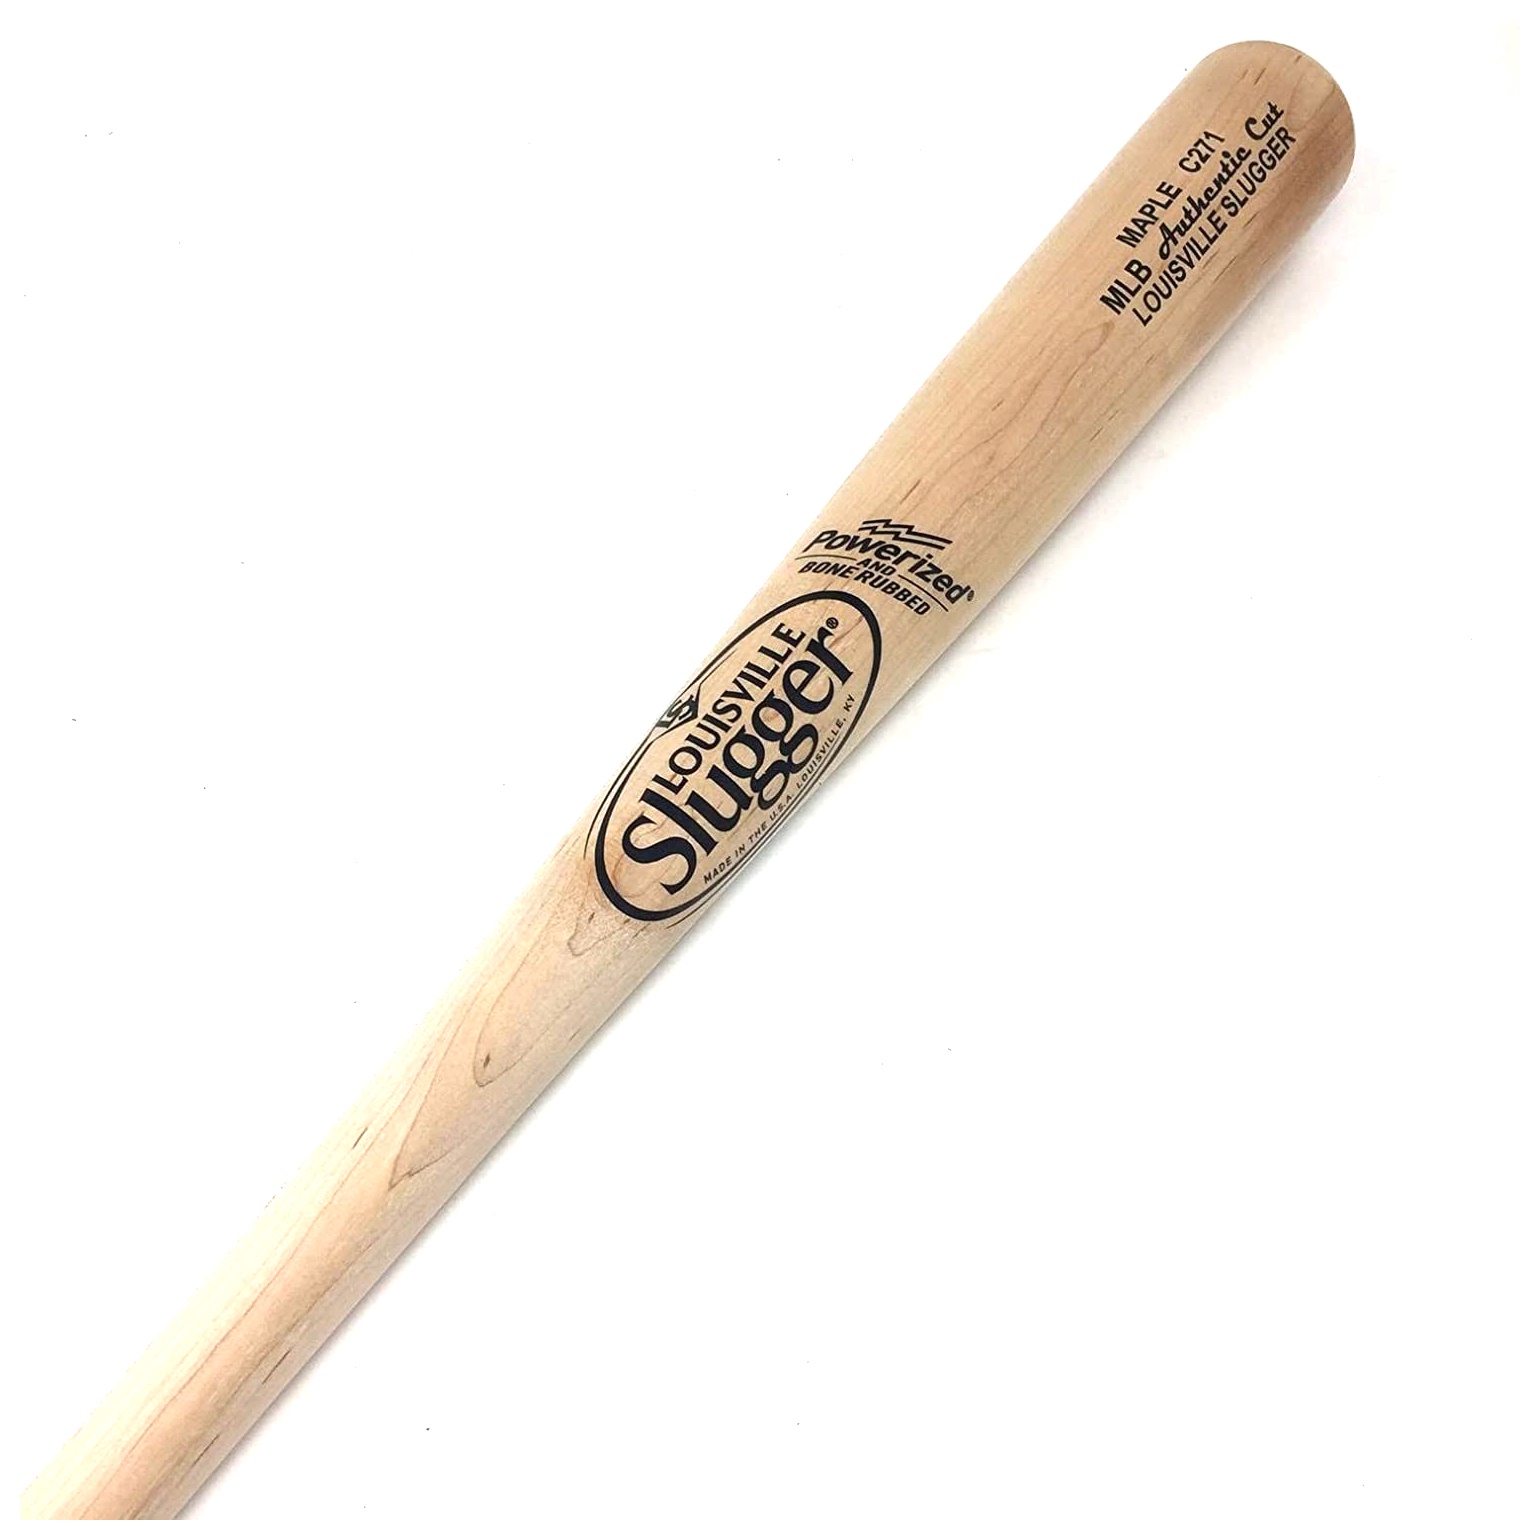 Model C271 - Balanced Swing Weight Maple Wood Bat High Gloss Natural Finish Bone Rubbed Cupped End - Yes